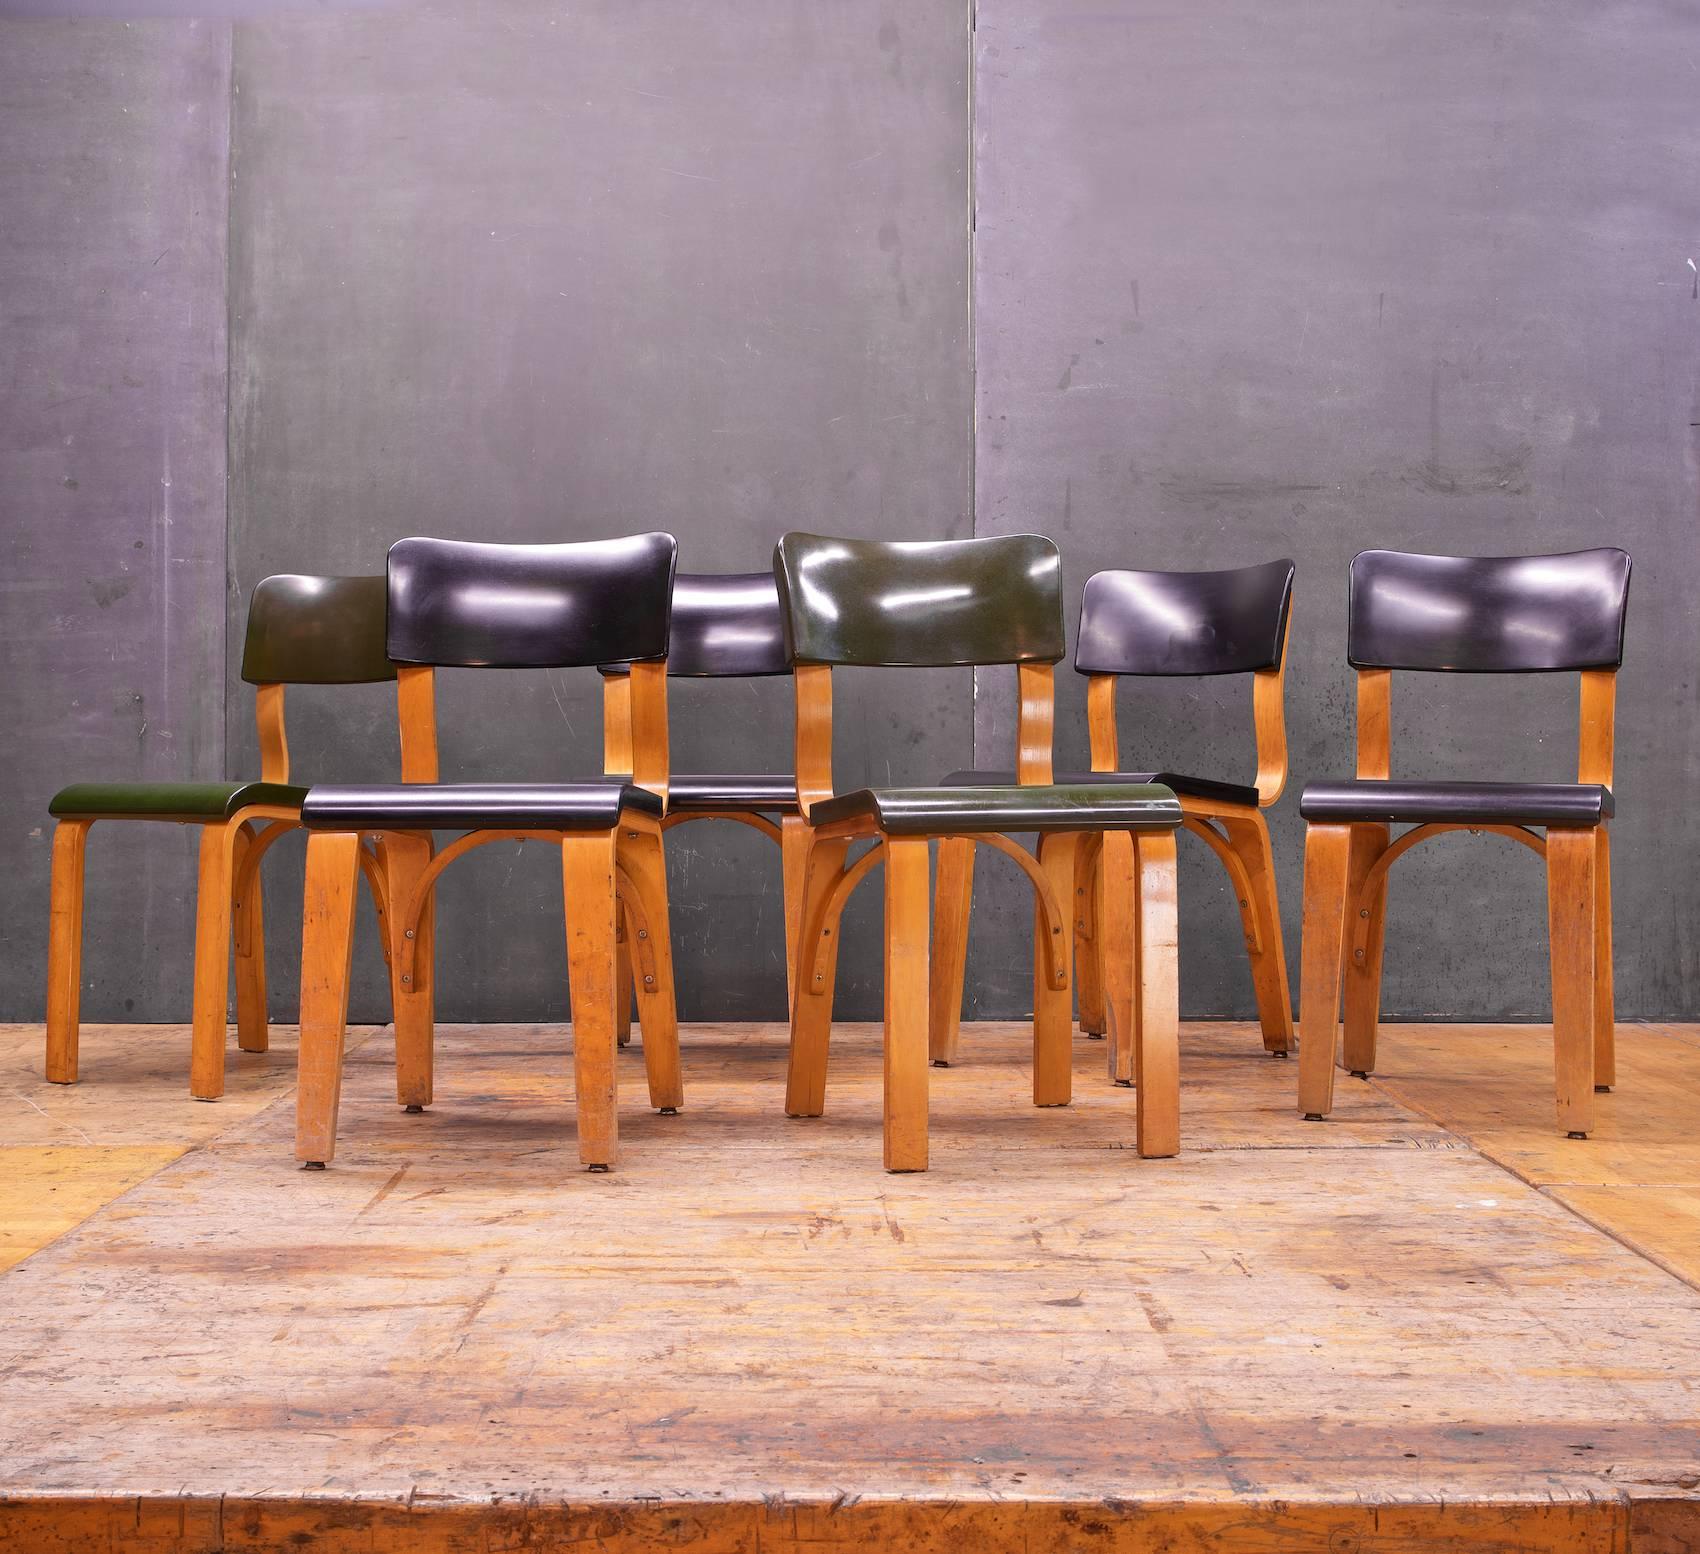 Early Mid-Century Modern Design in Original Finish; Patinated Lacquered Birch Frames.  Black Chair Legs are Taper, and Greens are Straight.